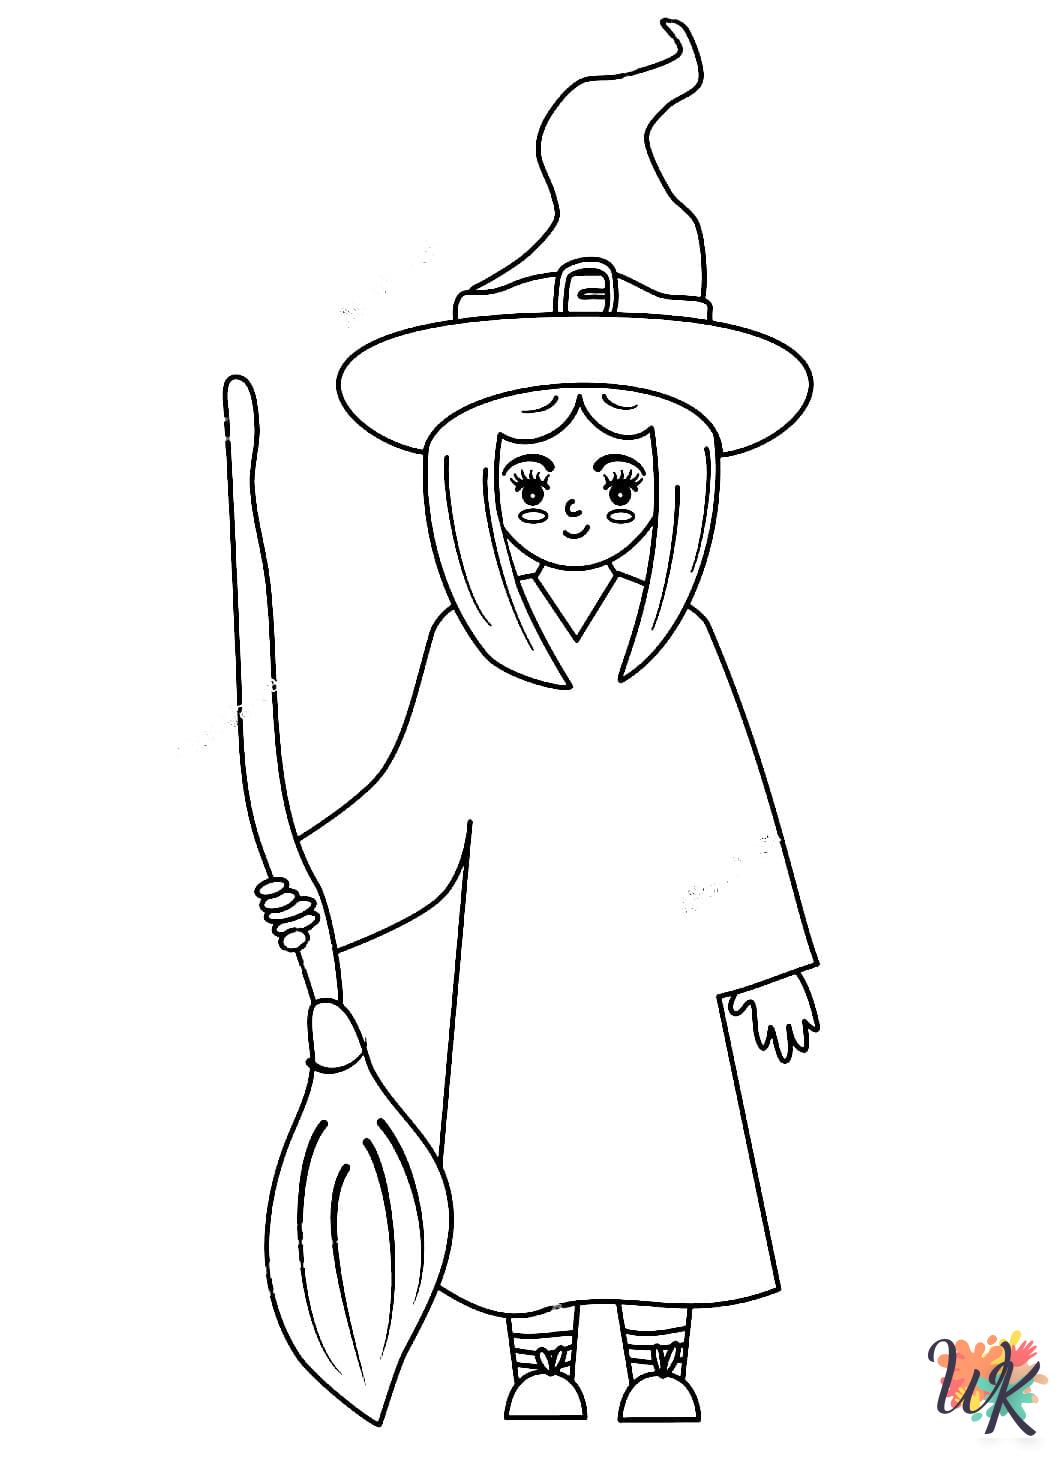 Witch ornament coloring pages